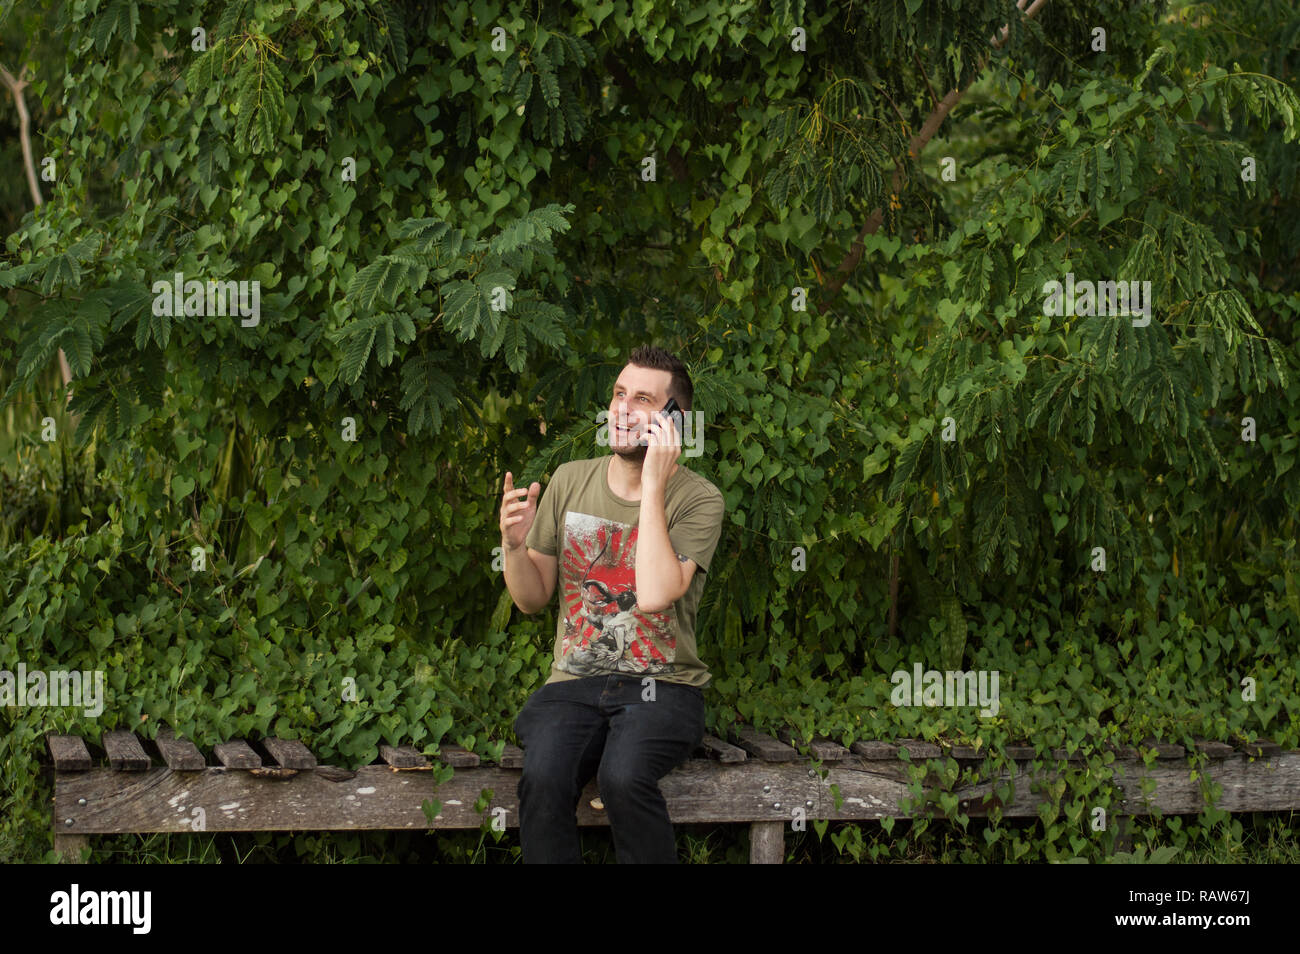 Middle aged man talking on mobile phone while in nature. Stock Photo